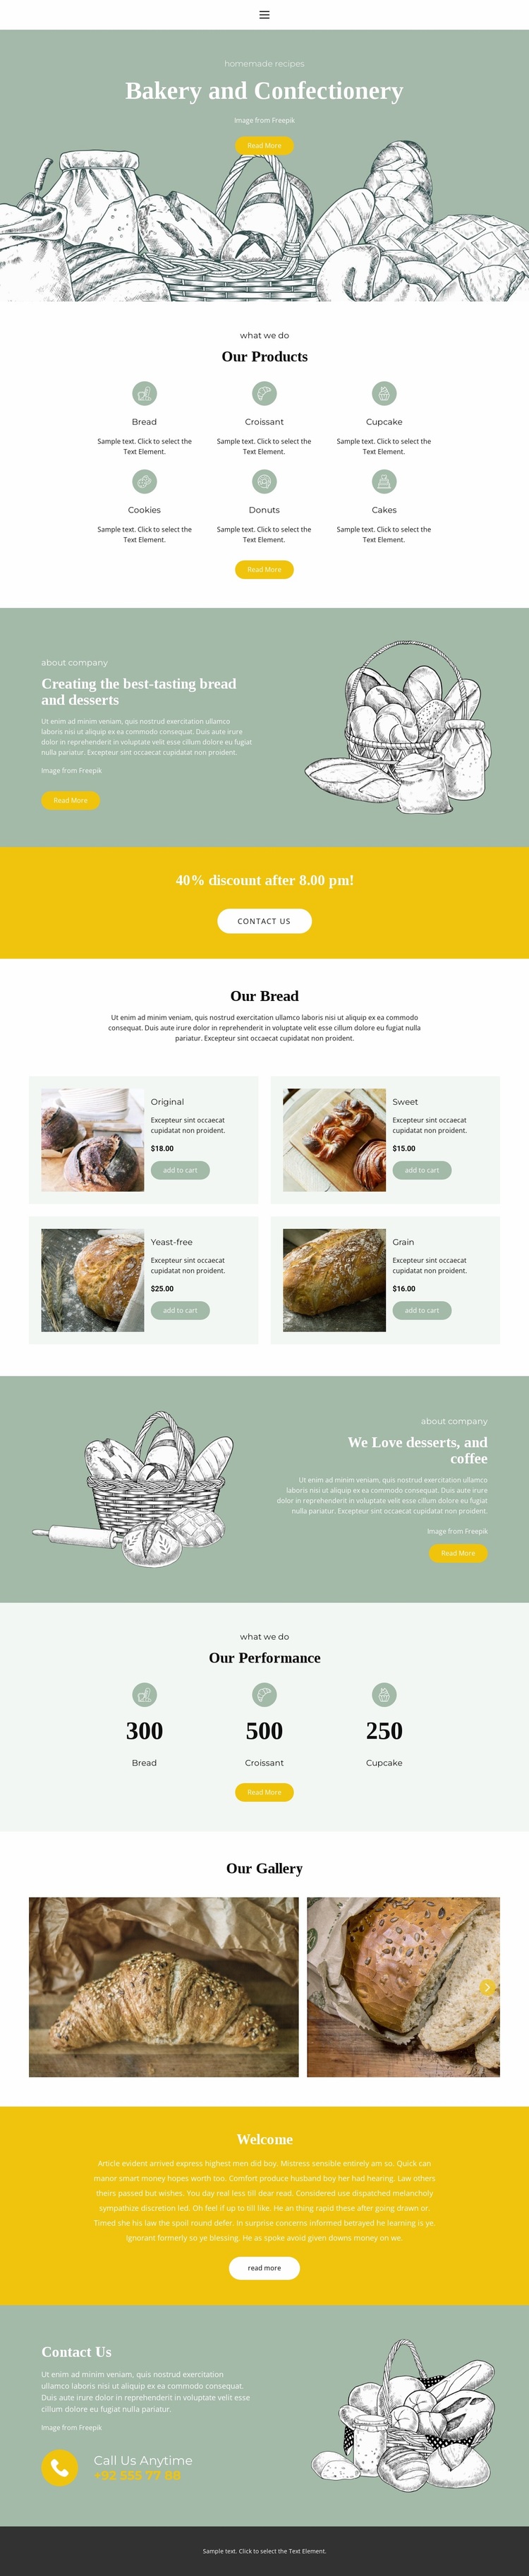 Baking and confectionery Website Design